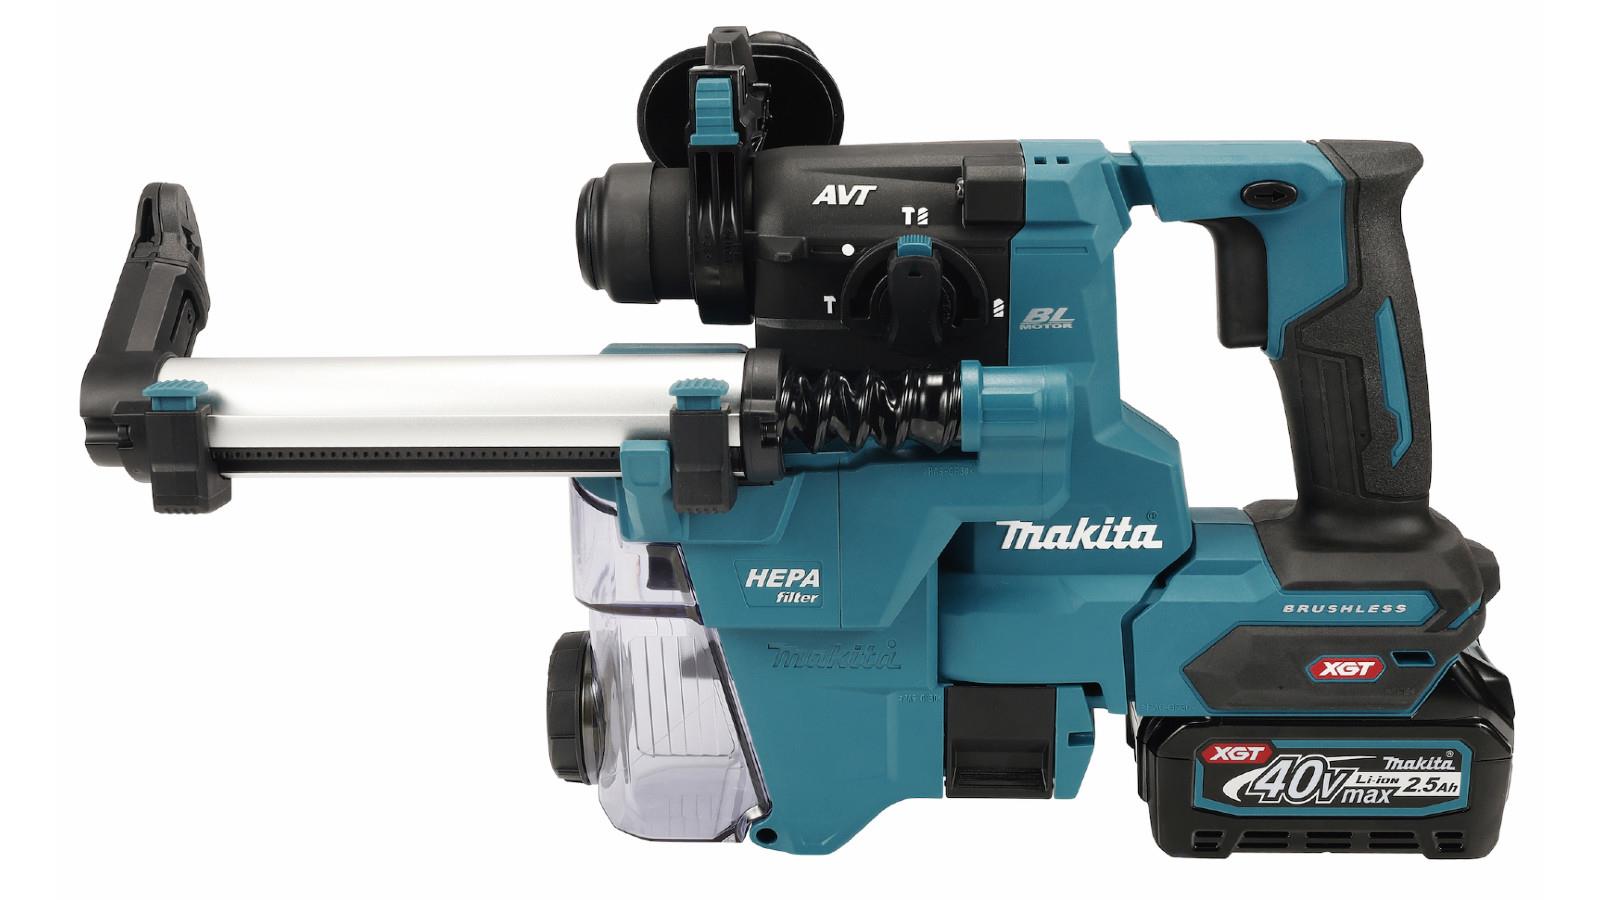 Makita packs a puch with its new compact hammer drill image